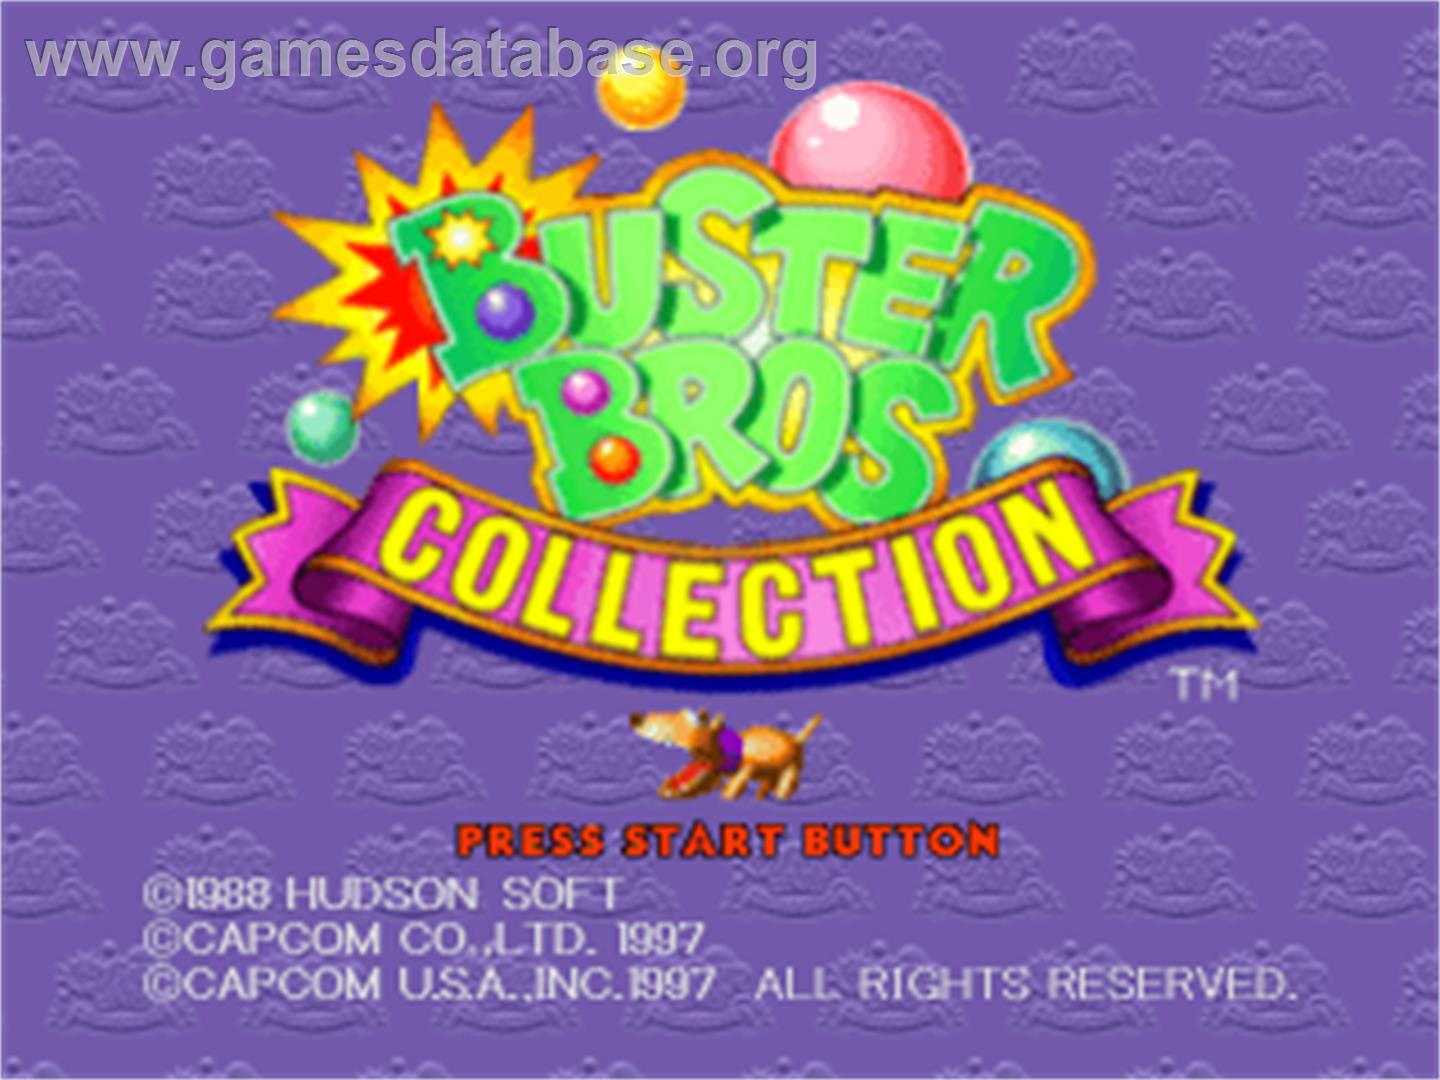 Buster Bros. Collection - Sony Playstation - Artwork - Title Screen